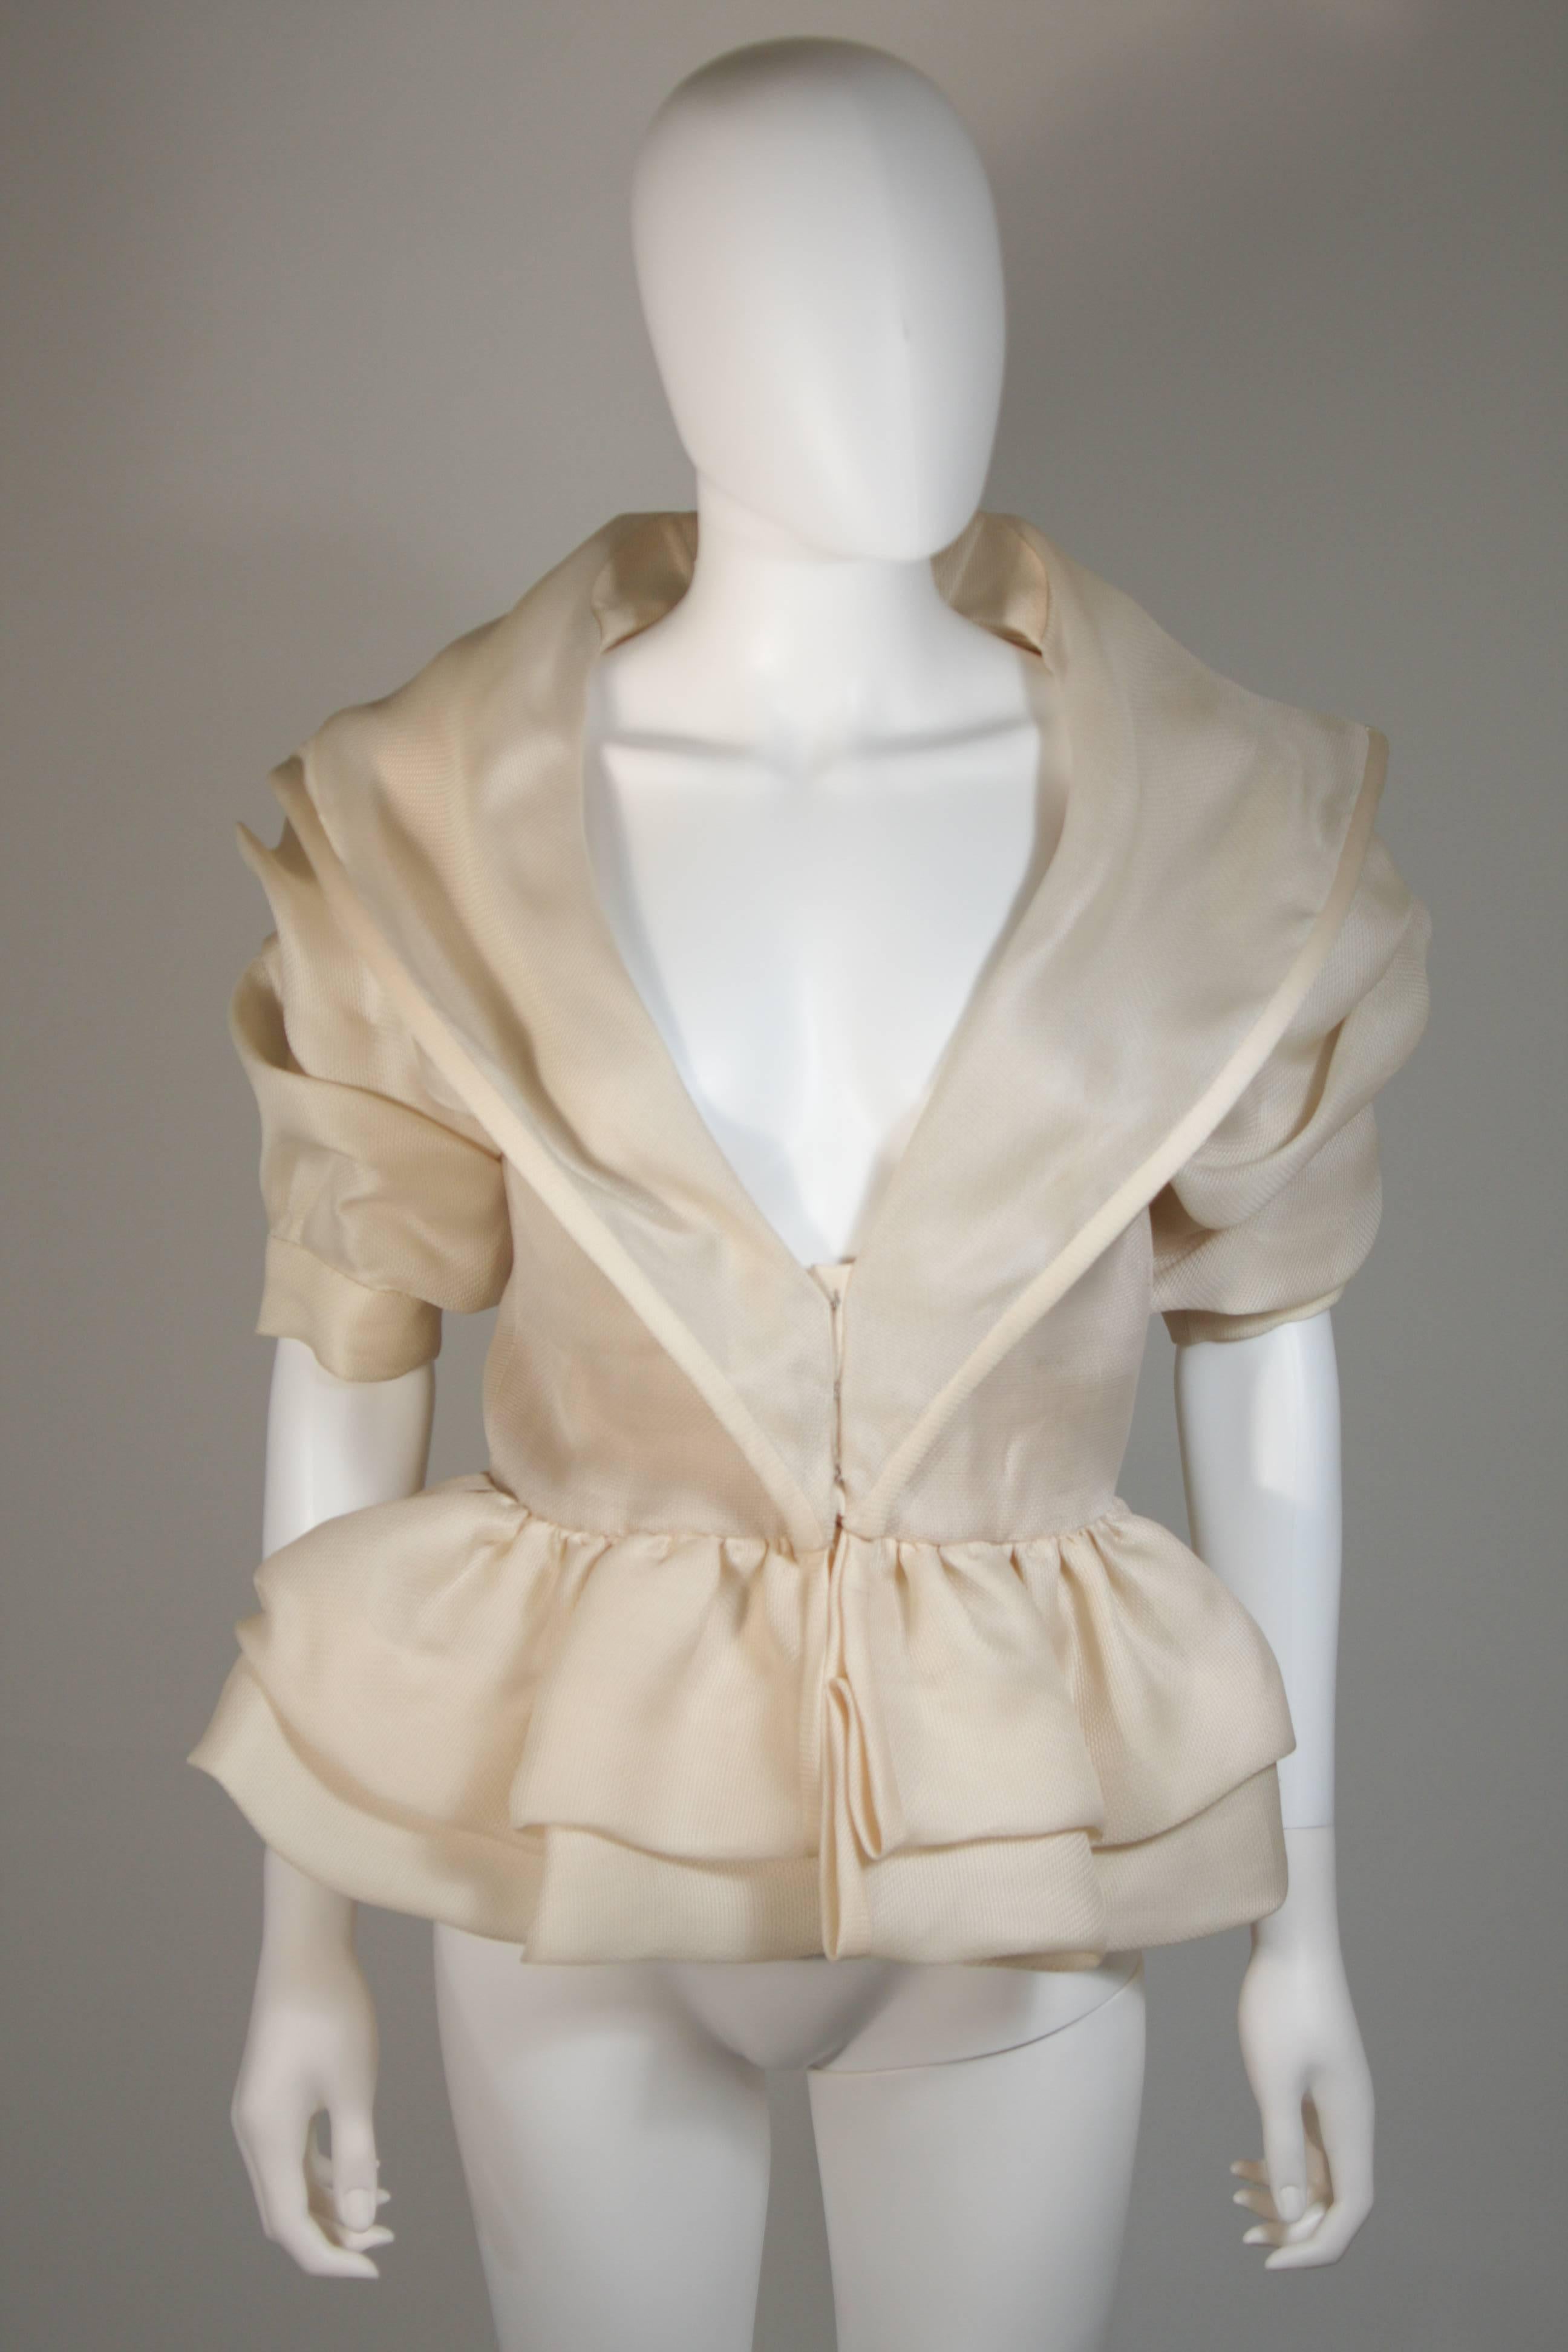 This Paul Louis Orrier Paris jacket is composed of an ivory/cream hued silk and acetate. The ruffled ivory fabric is accented by a structured hem. There are center front hook and eye closures. In excellent condition. Made in France.

**Please